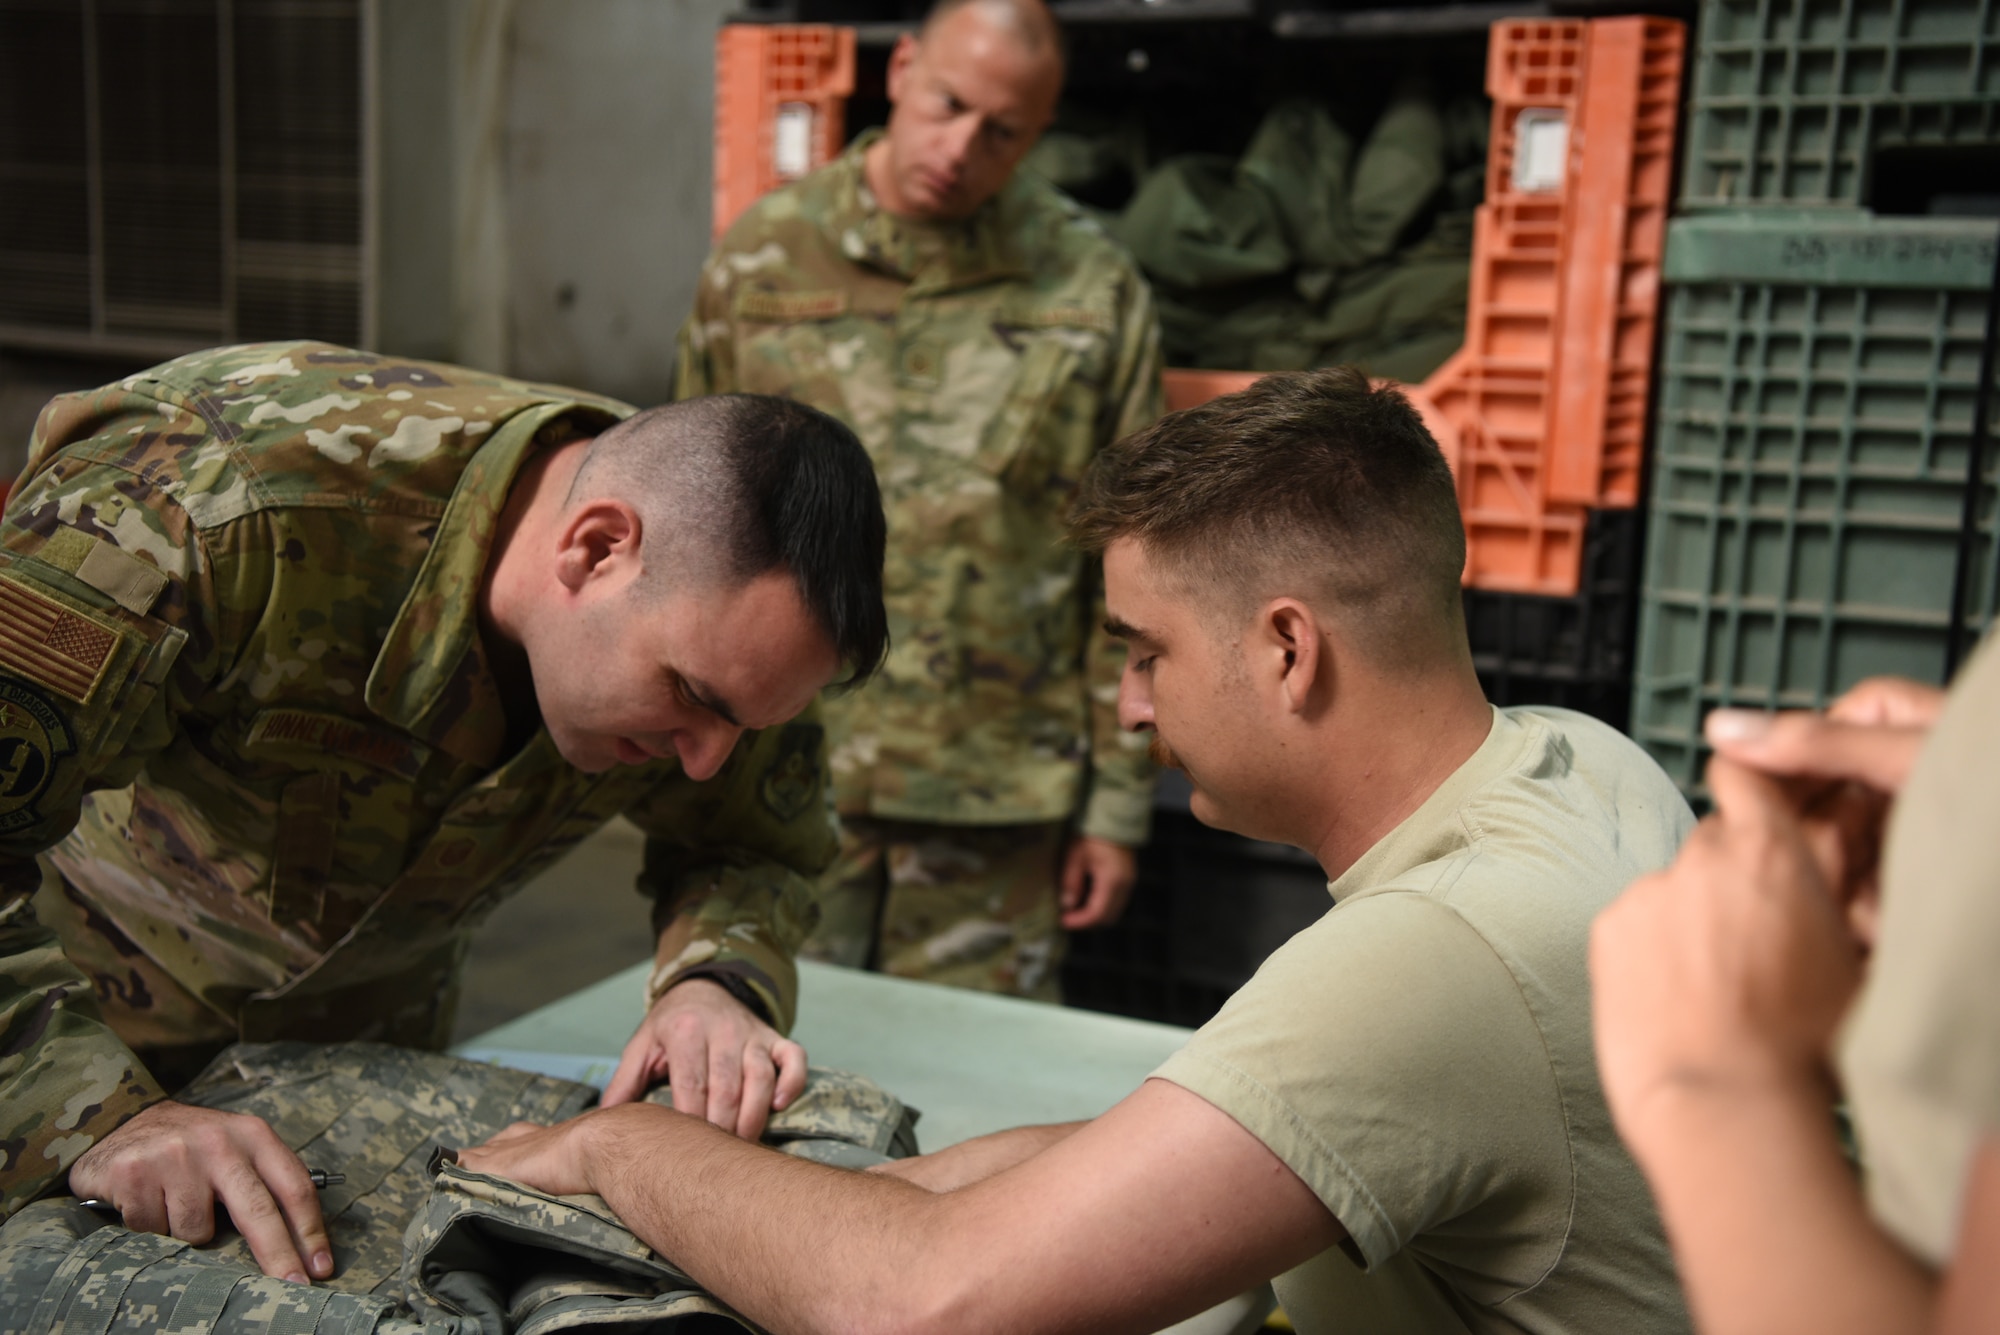 Members of the 380th Air Expeditionary Wing confirm the size of an Improved Outer Tactical Vest during an individual protective equipment issue exercise May 29, 2019, on Al Dhafra Air Base, United Arab Emirates.